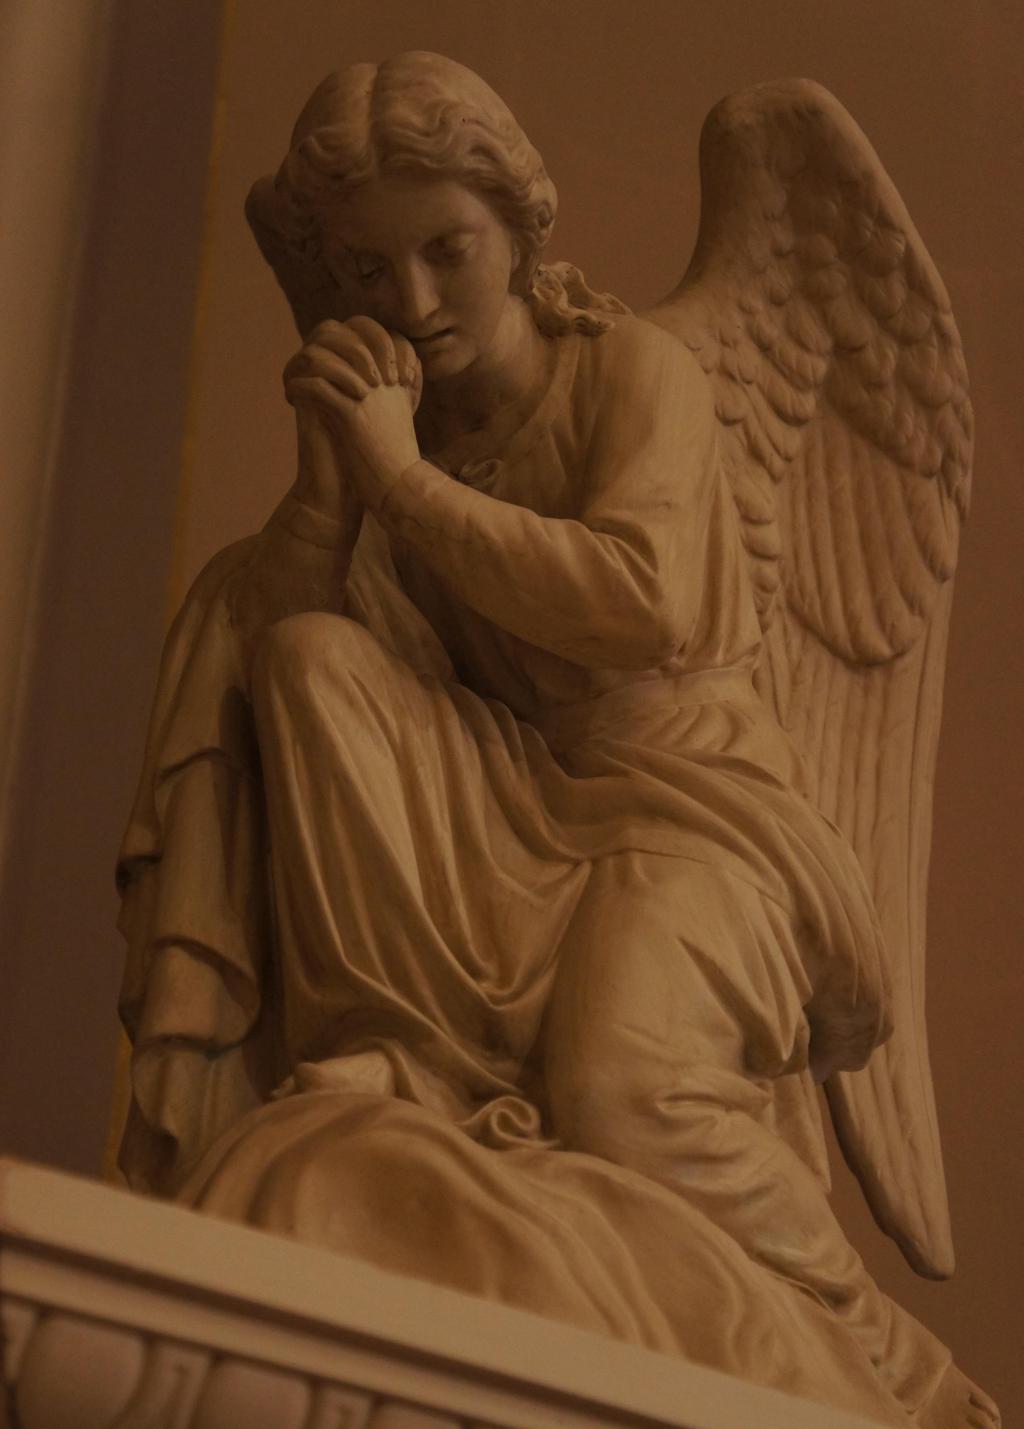 The two angels, which remind us to be respectful in the presence of the